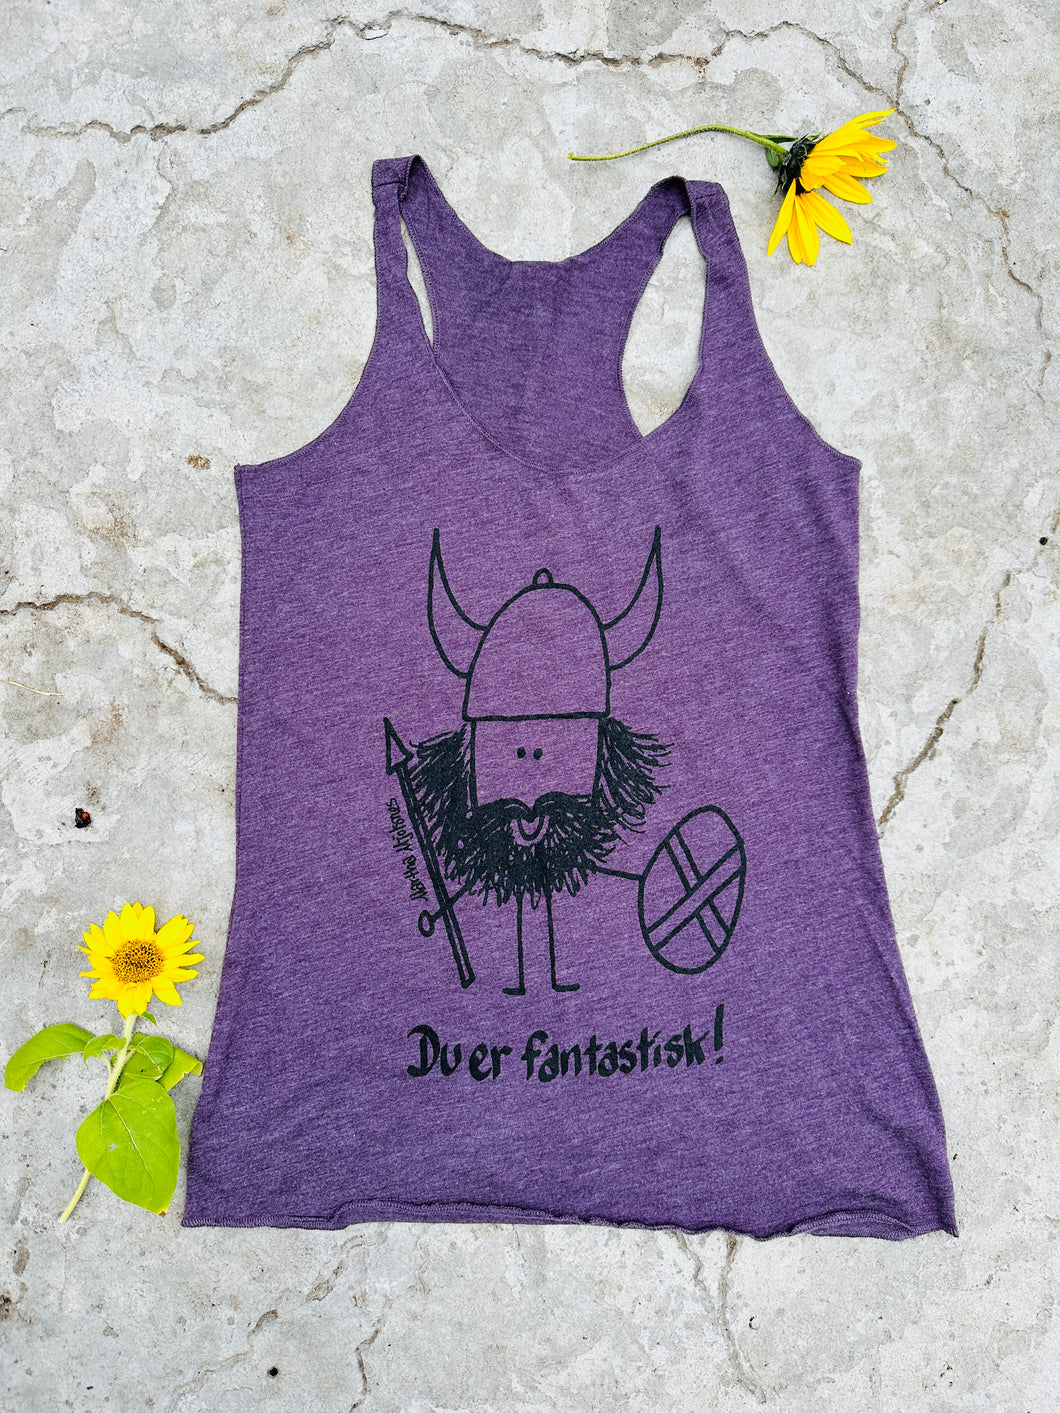 'You are fantastic!' tank top